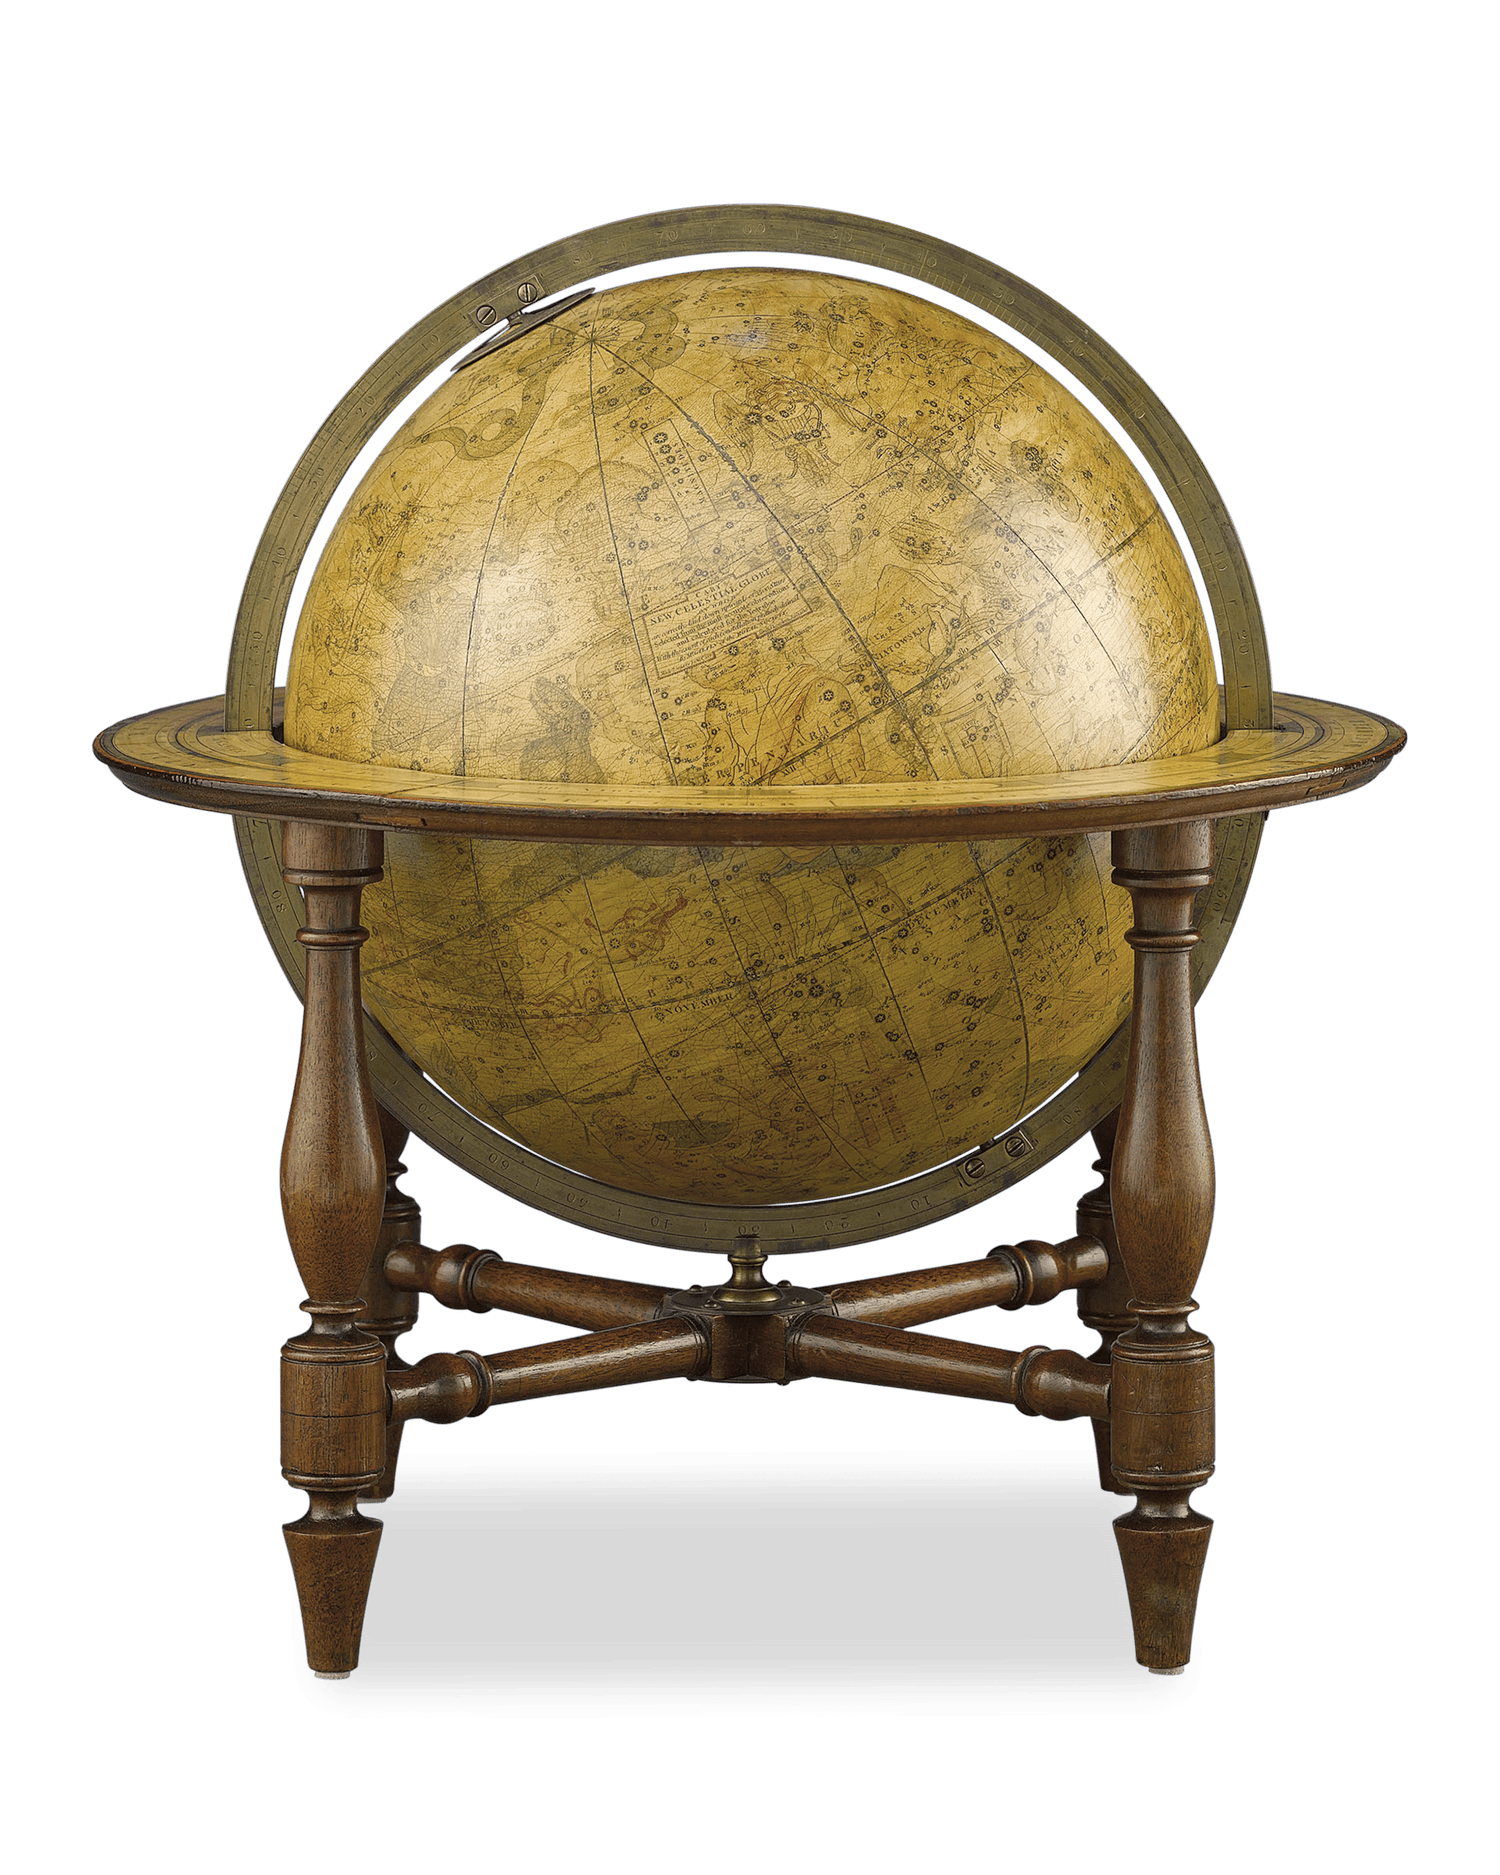 A sea of constellations are visible under the warm patina of the celestial globe